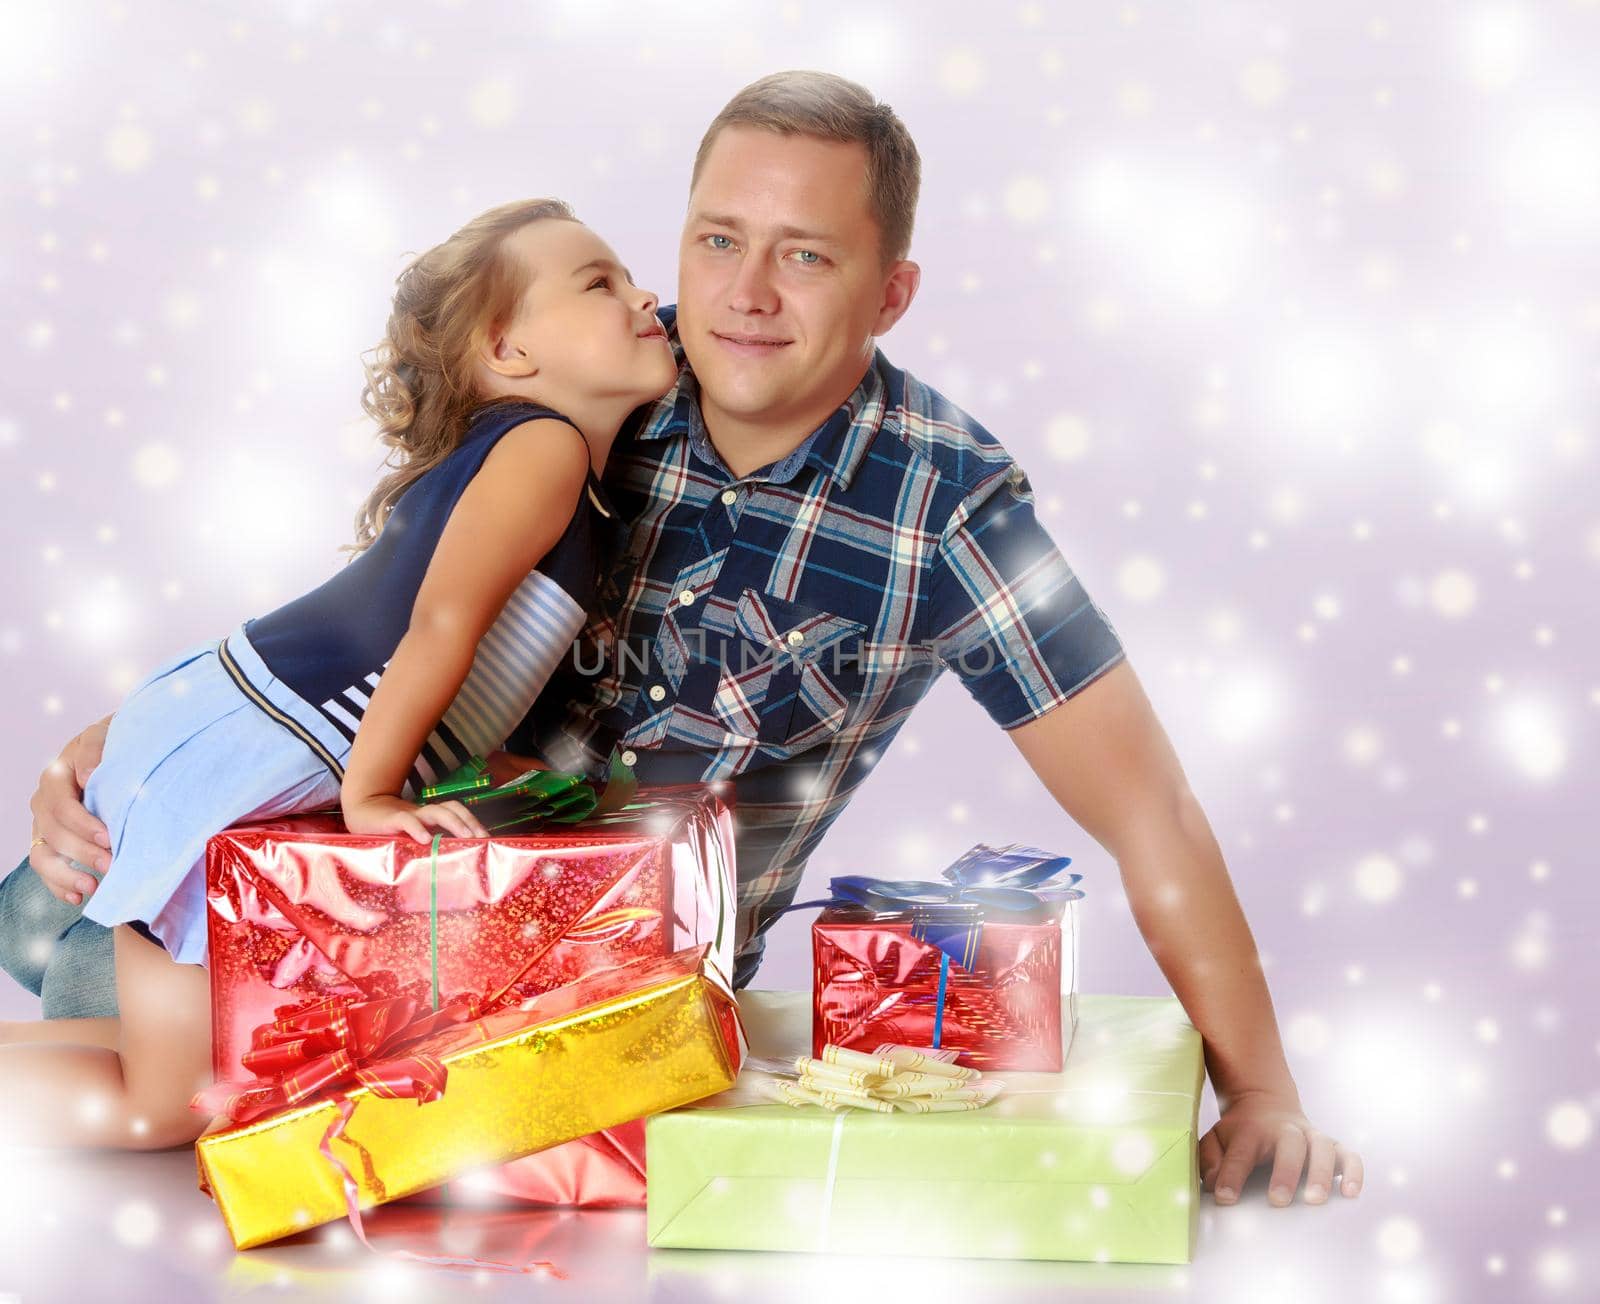 Gentle little girl kissing her beloved father, who is sitting on the floor surrounded by a variety of beautifully packaged boxes with gifts.Blue Christmas festive background with white snowflakes.